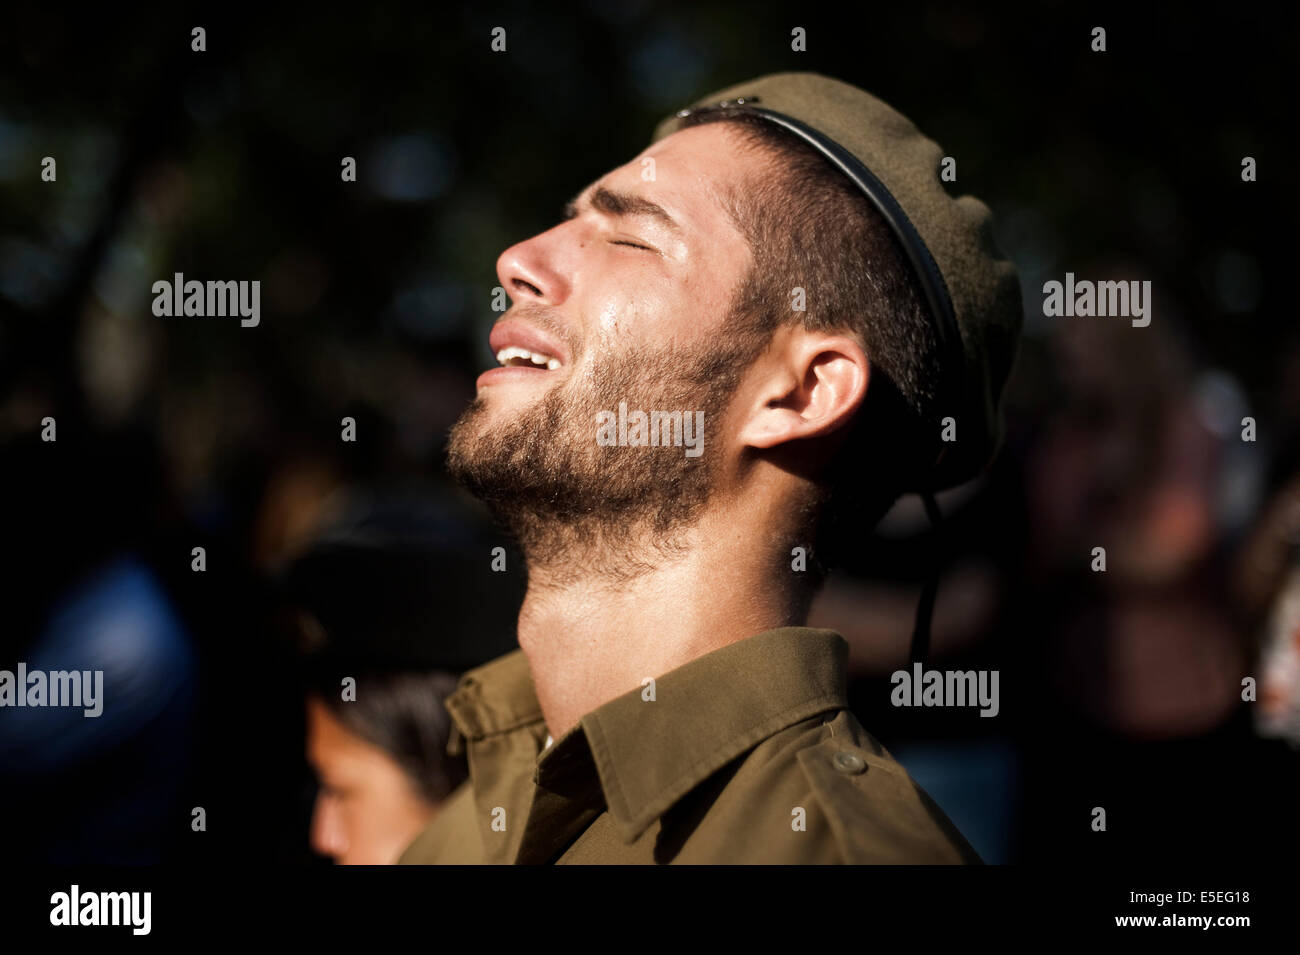 An Israeli soldier cries during the funeral of Sergeant Daniel Kedmi at Kiryat Shaul cemetery. The IDF soldier was killed by a mortar shell during attempted terrorist infiltration close to the Gaza border. © Marco Bottelli/Pacific Press/Alamy Live News Stock Photo